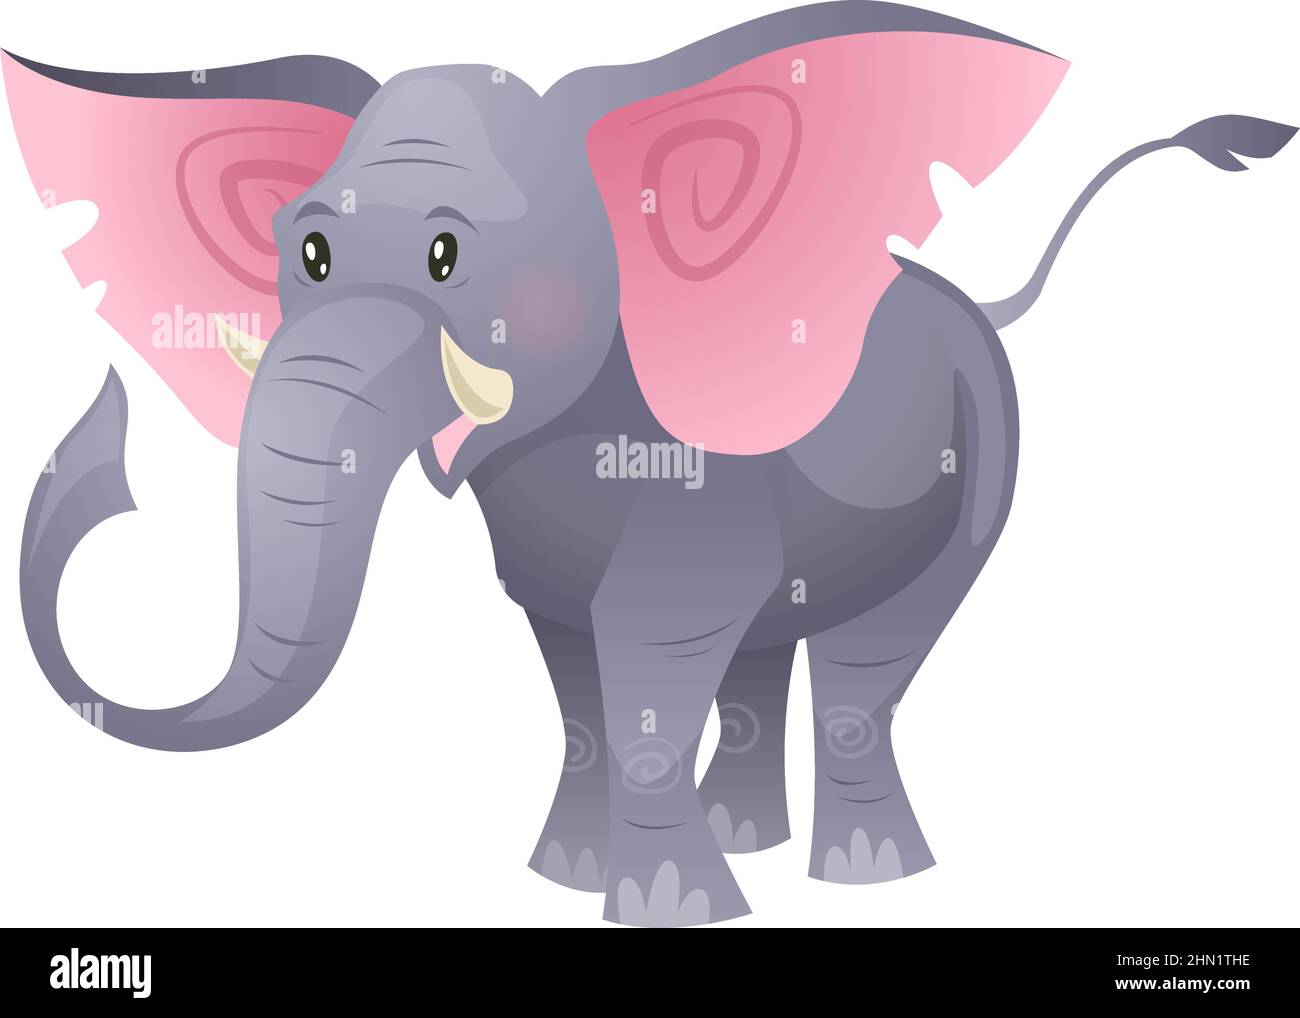 Elephant big ears Cut Out Stock Images & Pictures - Page 3 - Alamy